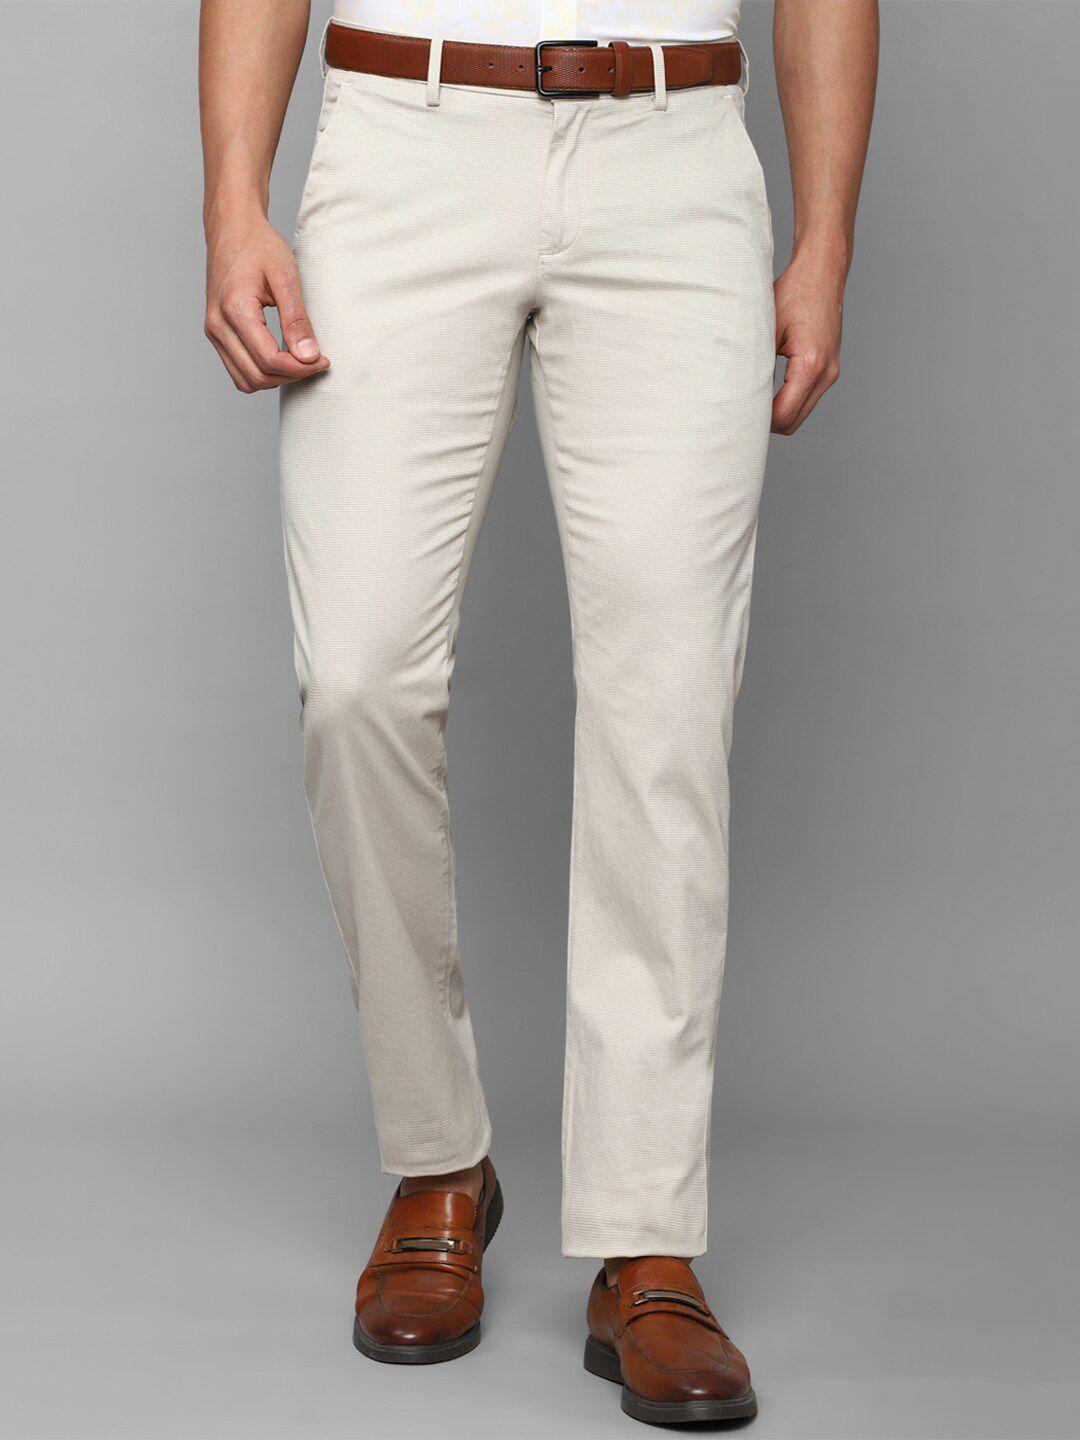 allen solly men slim fit chinos trousers